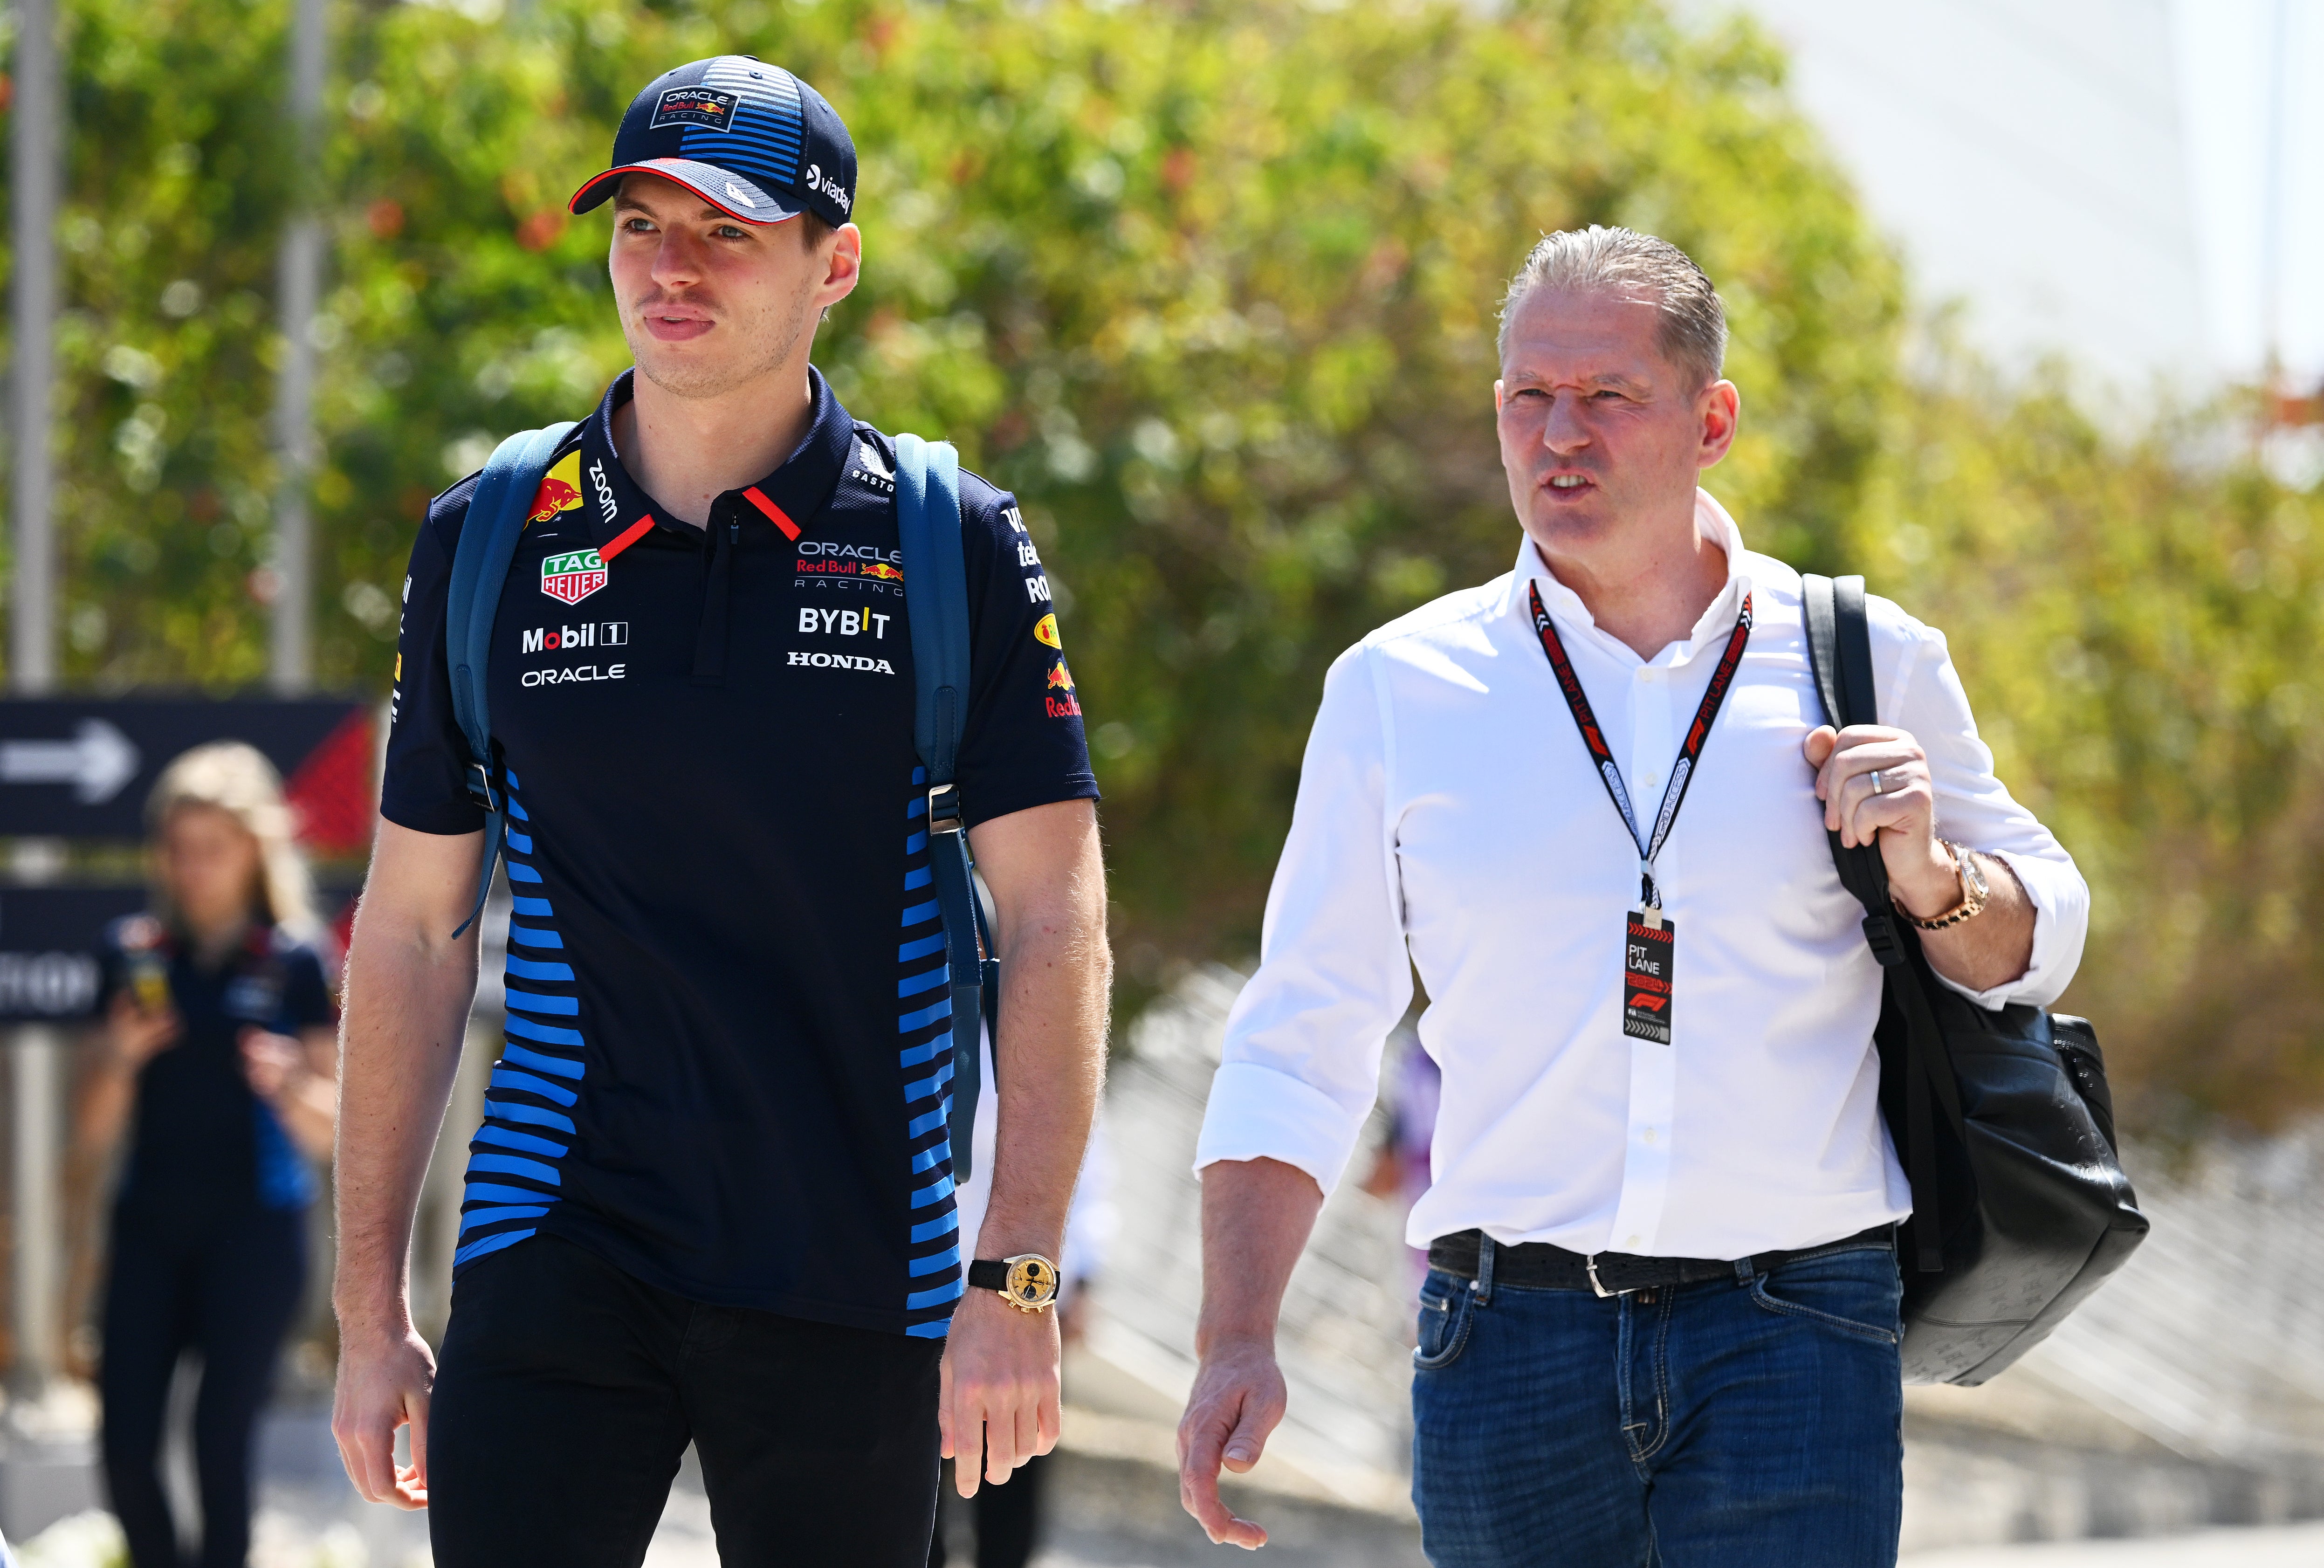 Max Verstappen threatened to leave Red Bull while father Jos said the team could ‘explode’ if Horner stays